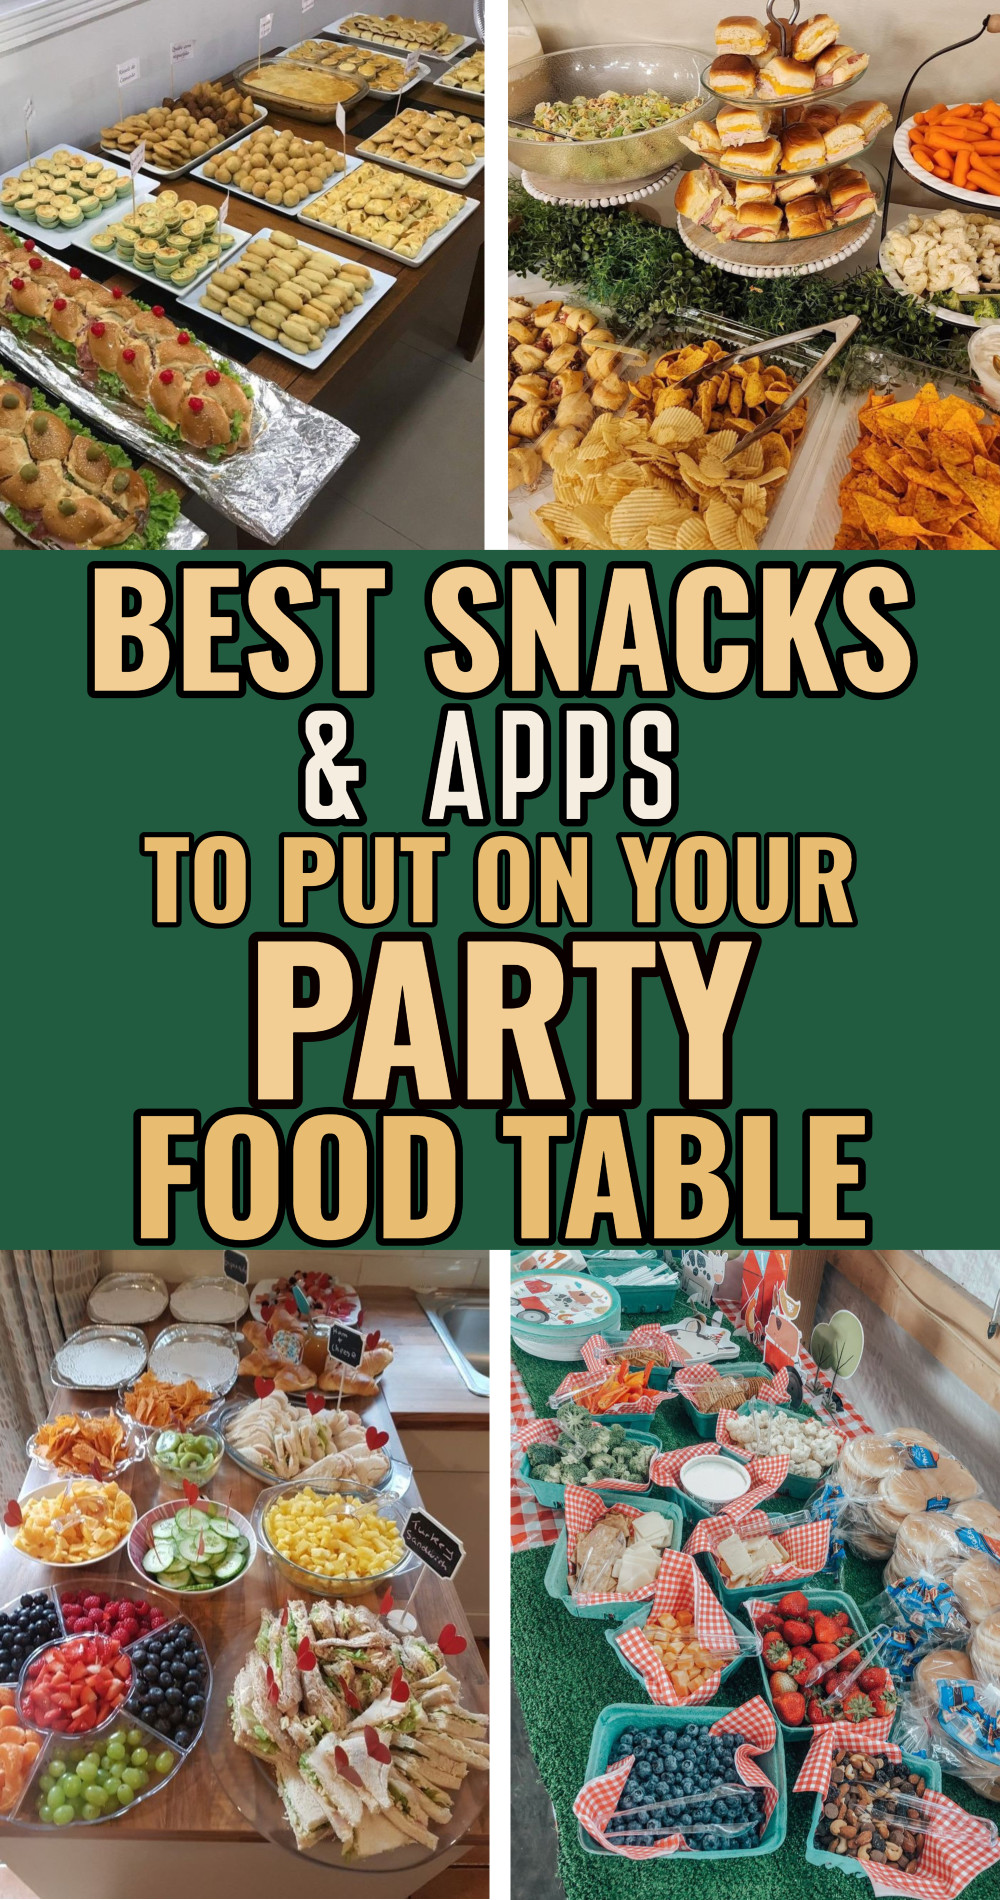 Best snacks and apps to put on your party food table